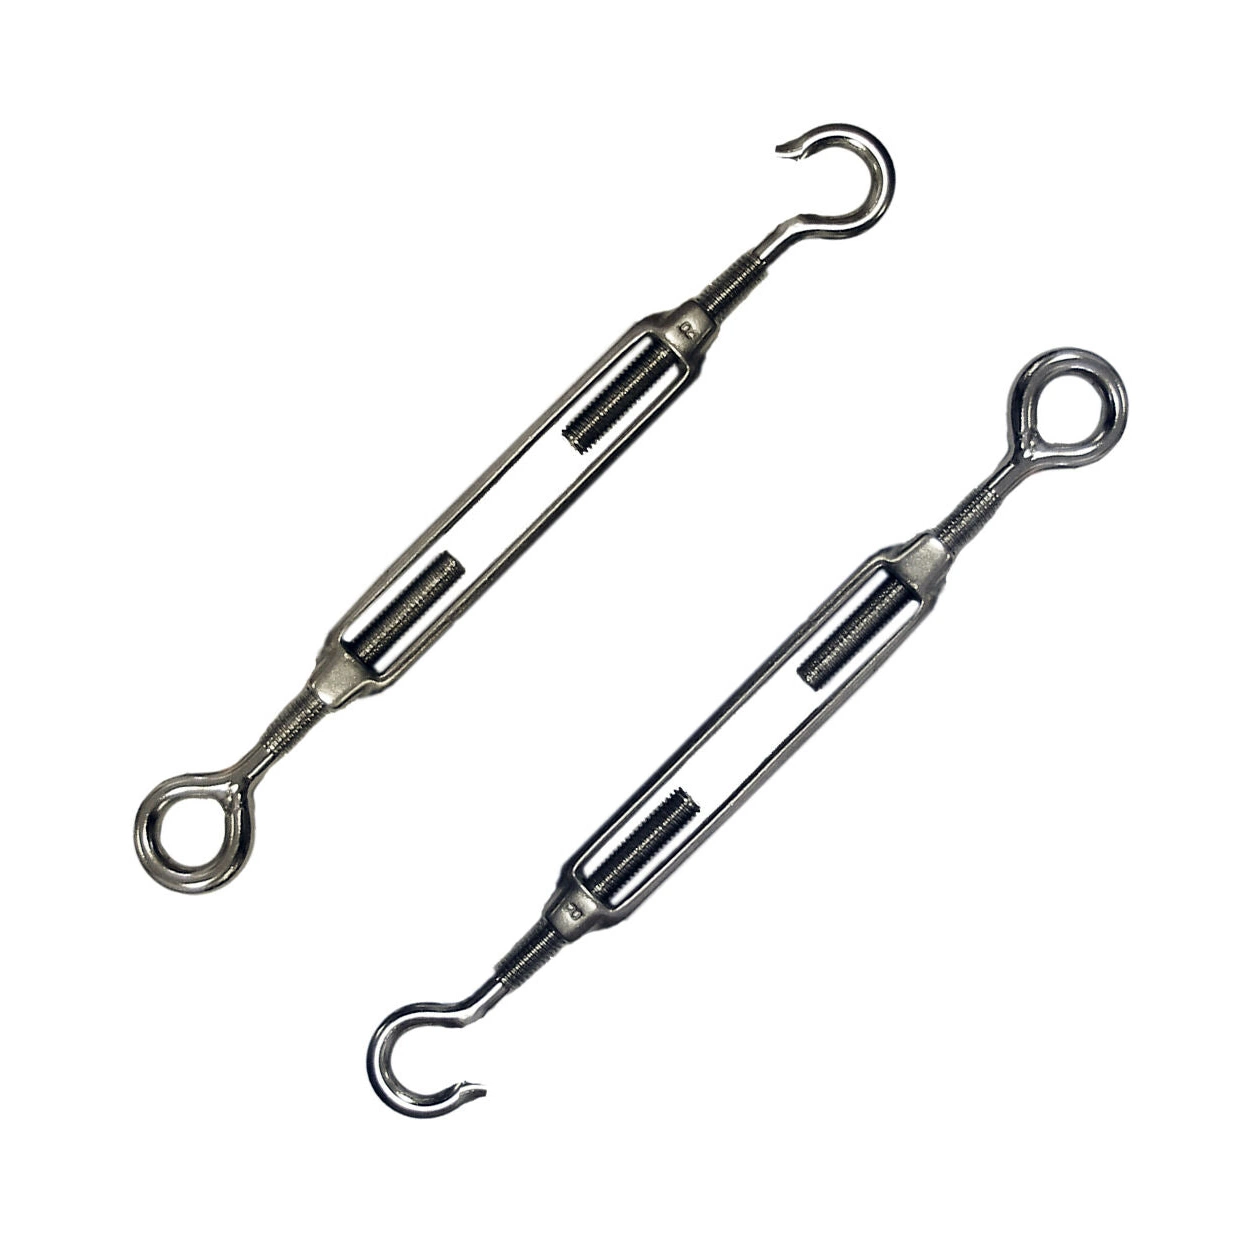 50%off Wholesales Heavy Duty DIN1480 Wire Rope Turnbuckle Hook-Eye Forged Steel Galvanized DIN1480 Turnbuckle